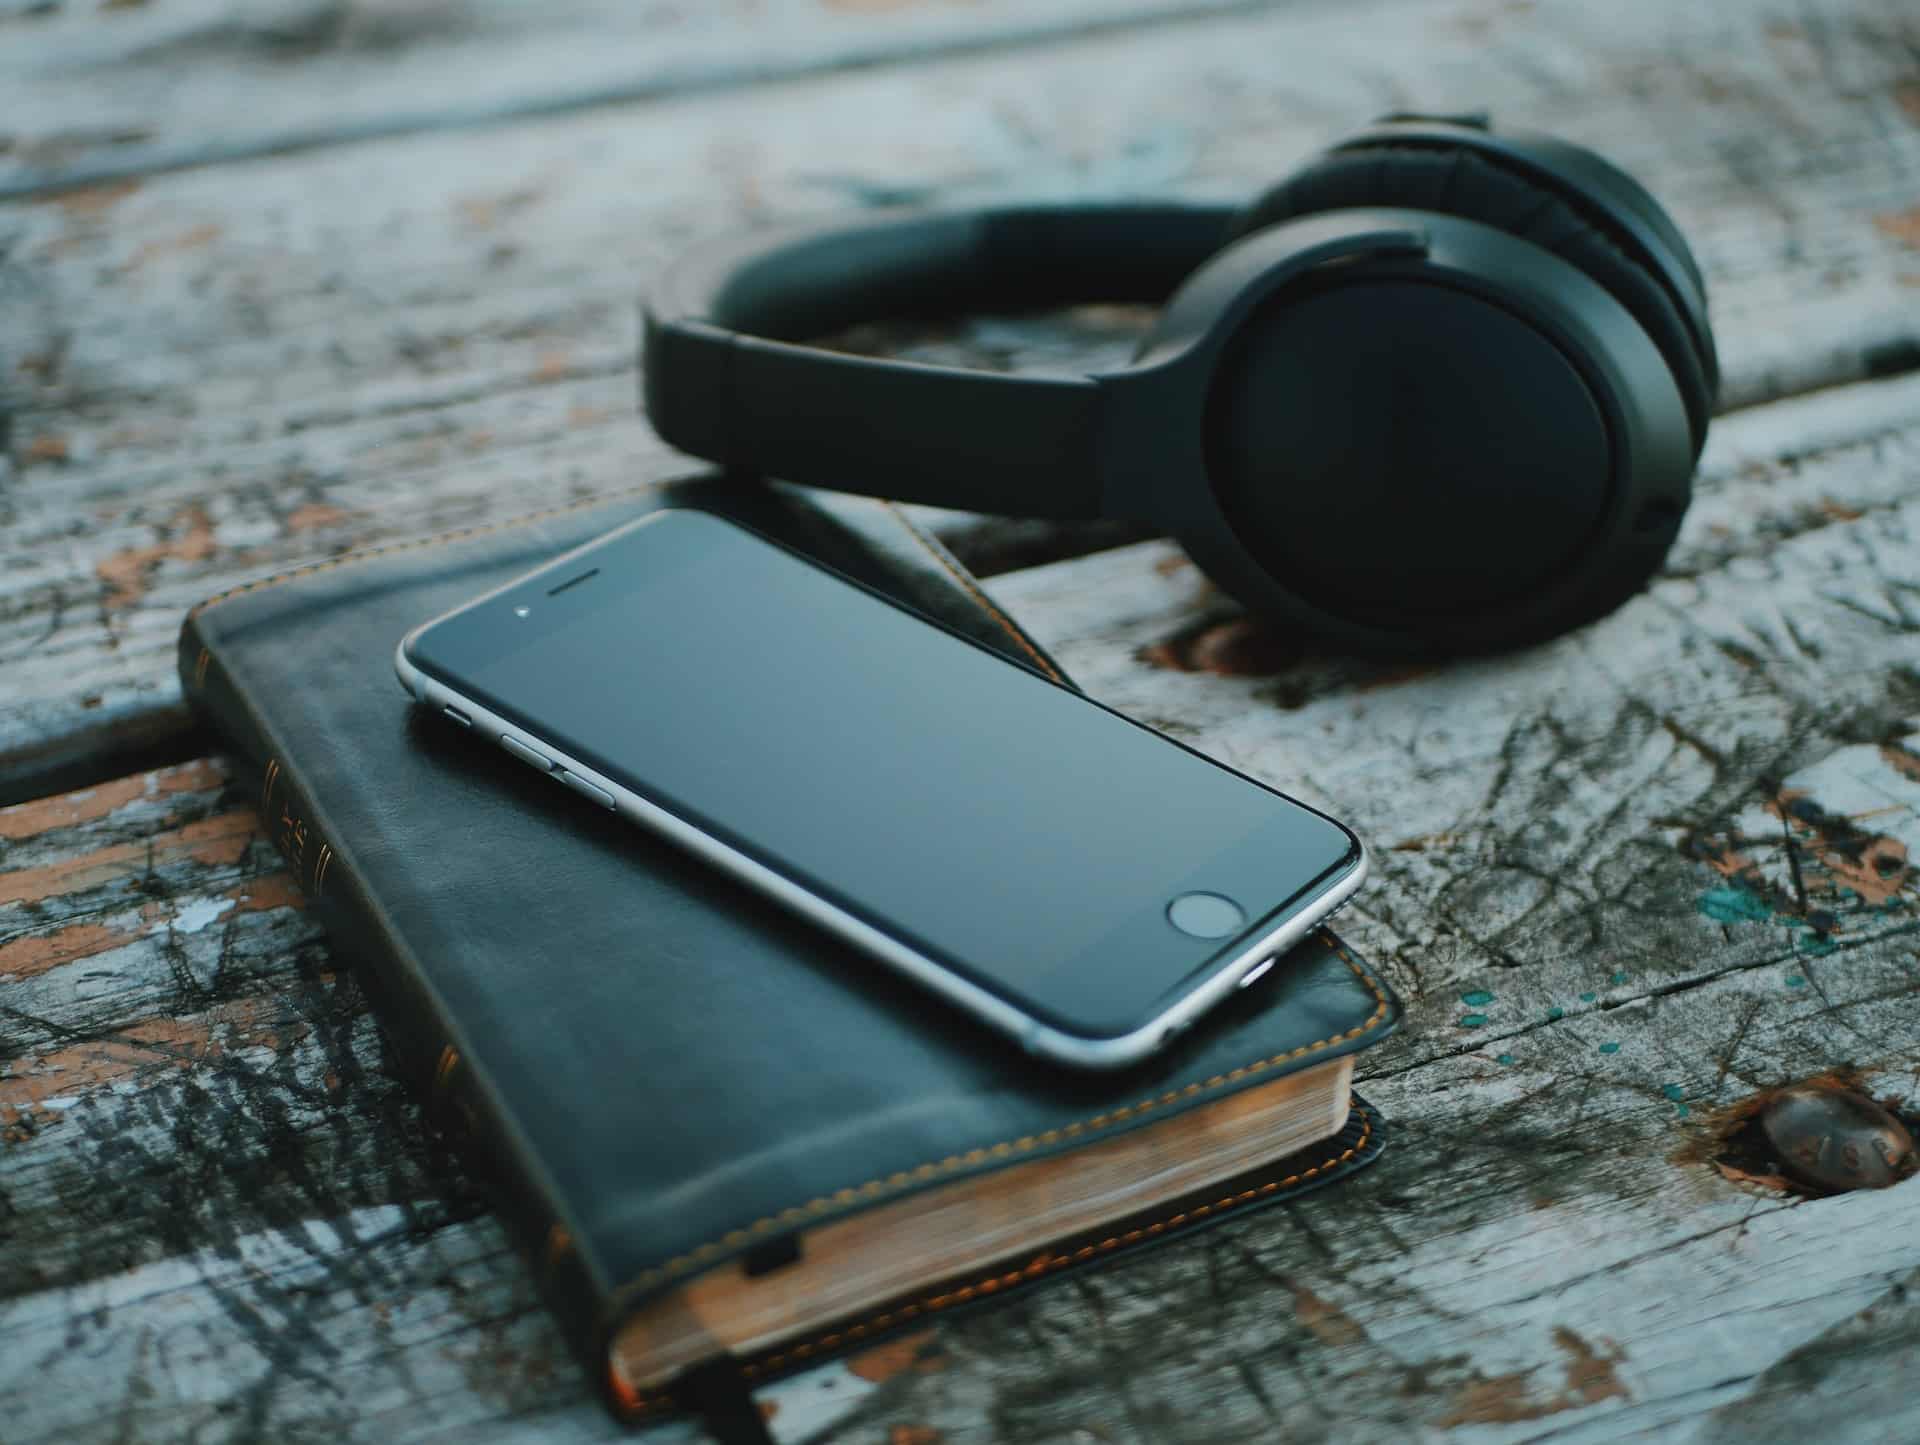 Newbie real estate investors must consider their exposure level and niche when choosing a podcast alternative